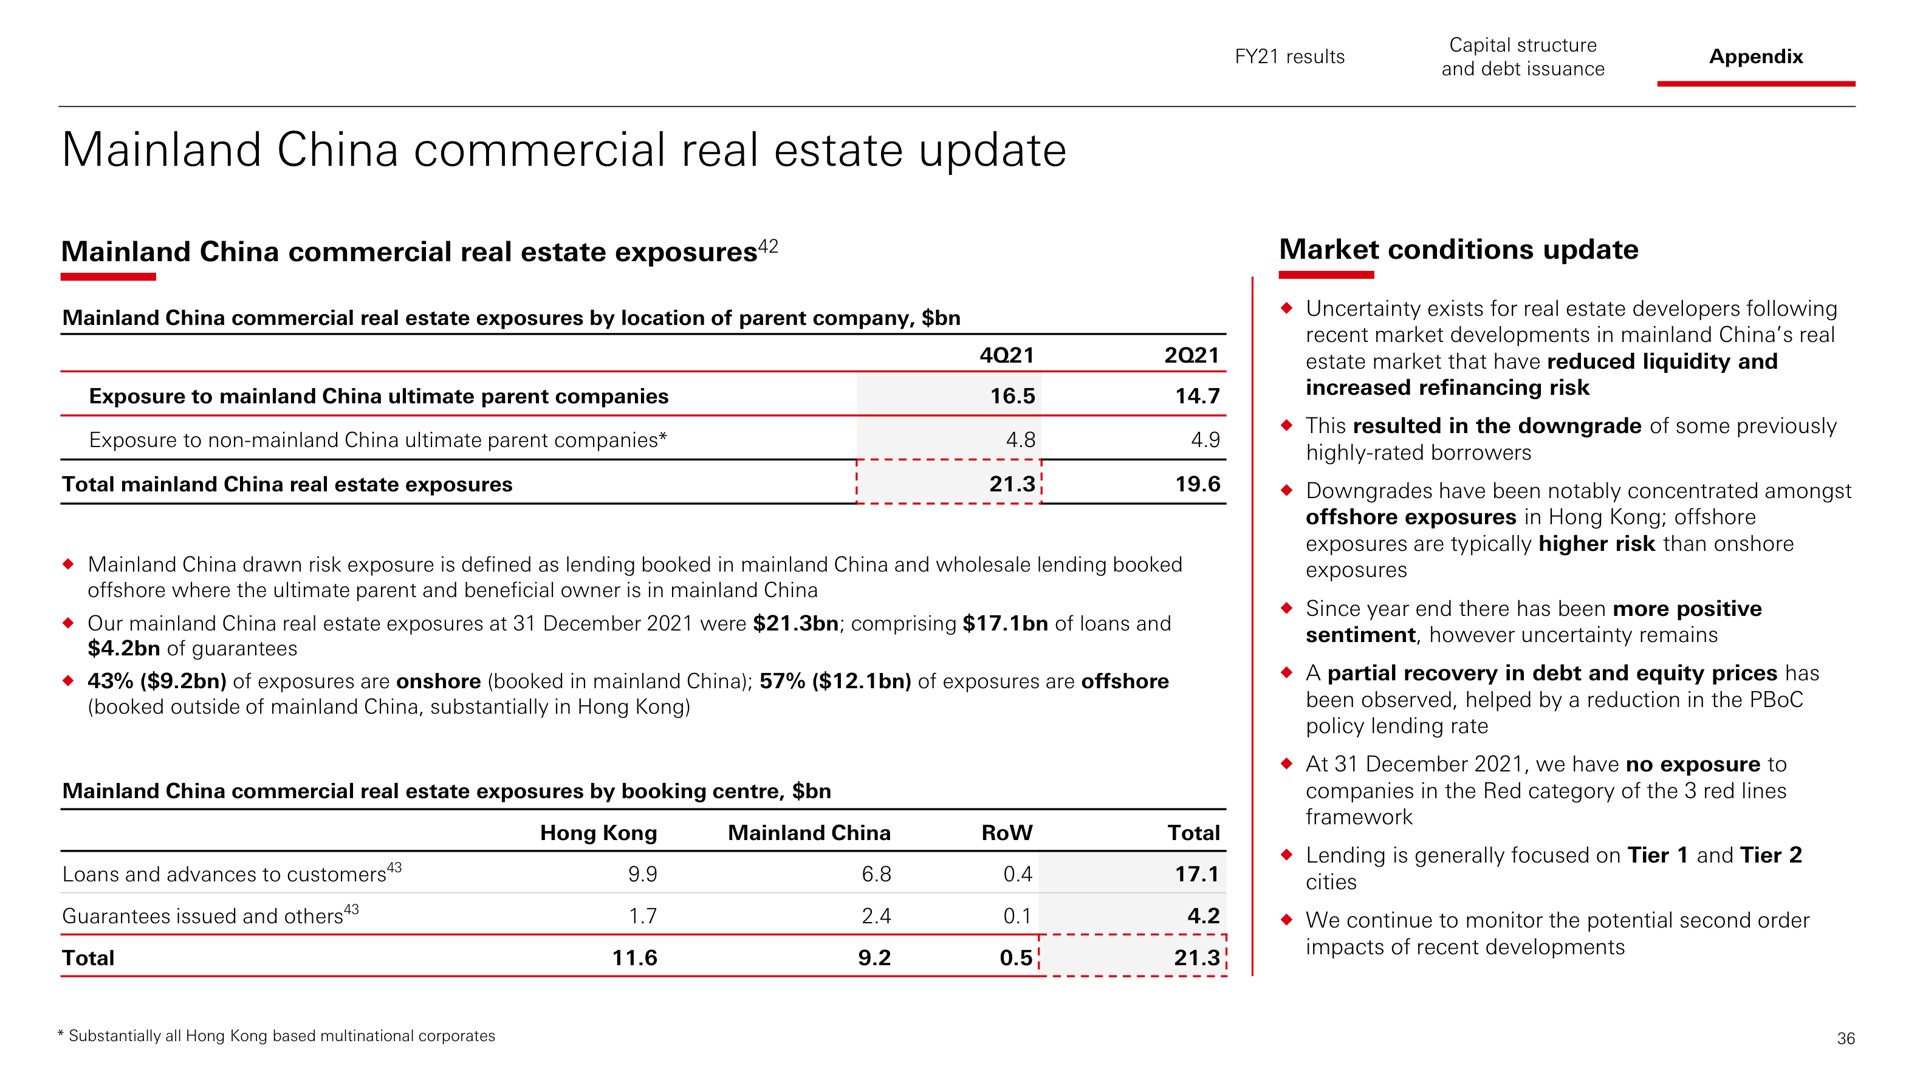 china commercial real estate update china commercial real estate exposures market conditions update total | HSBC